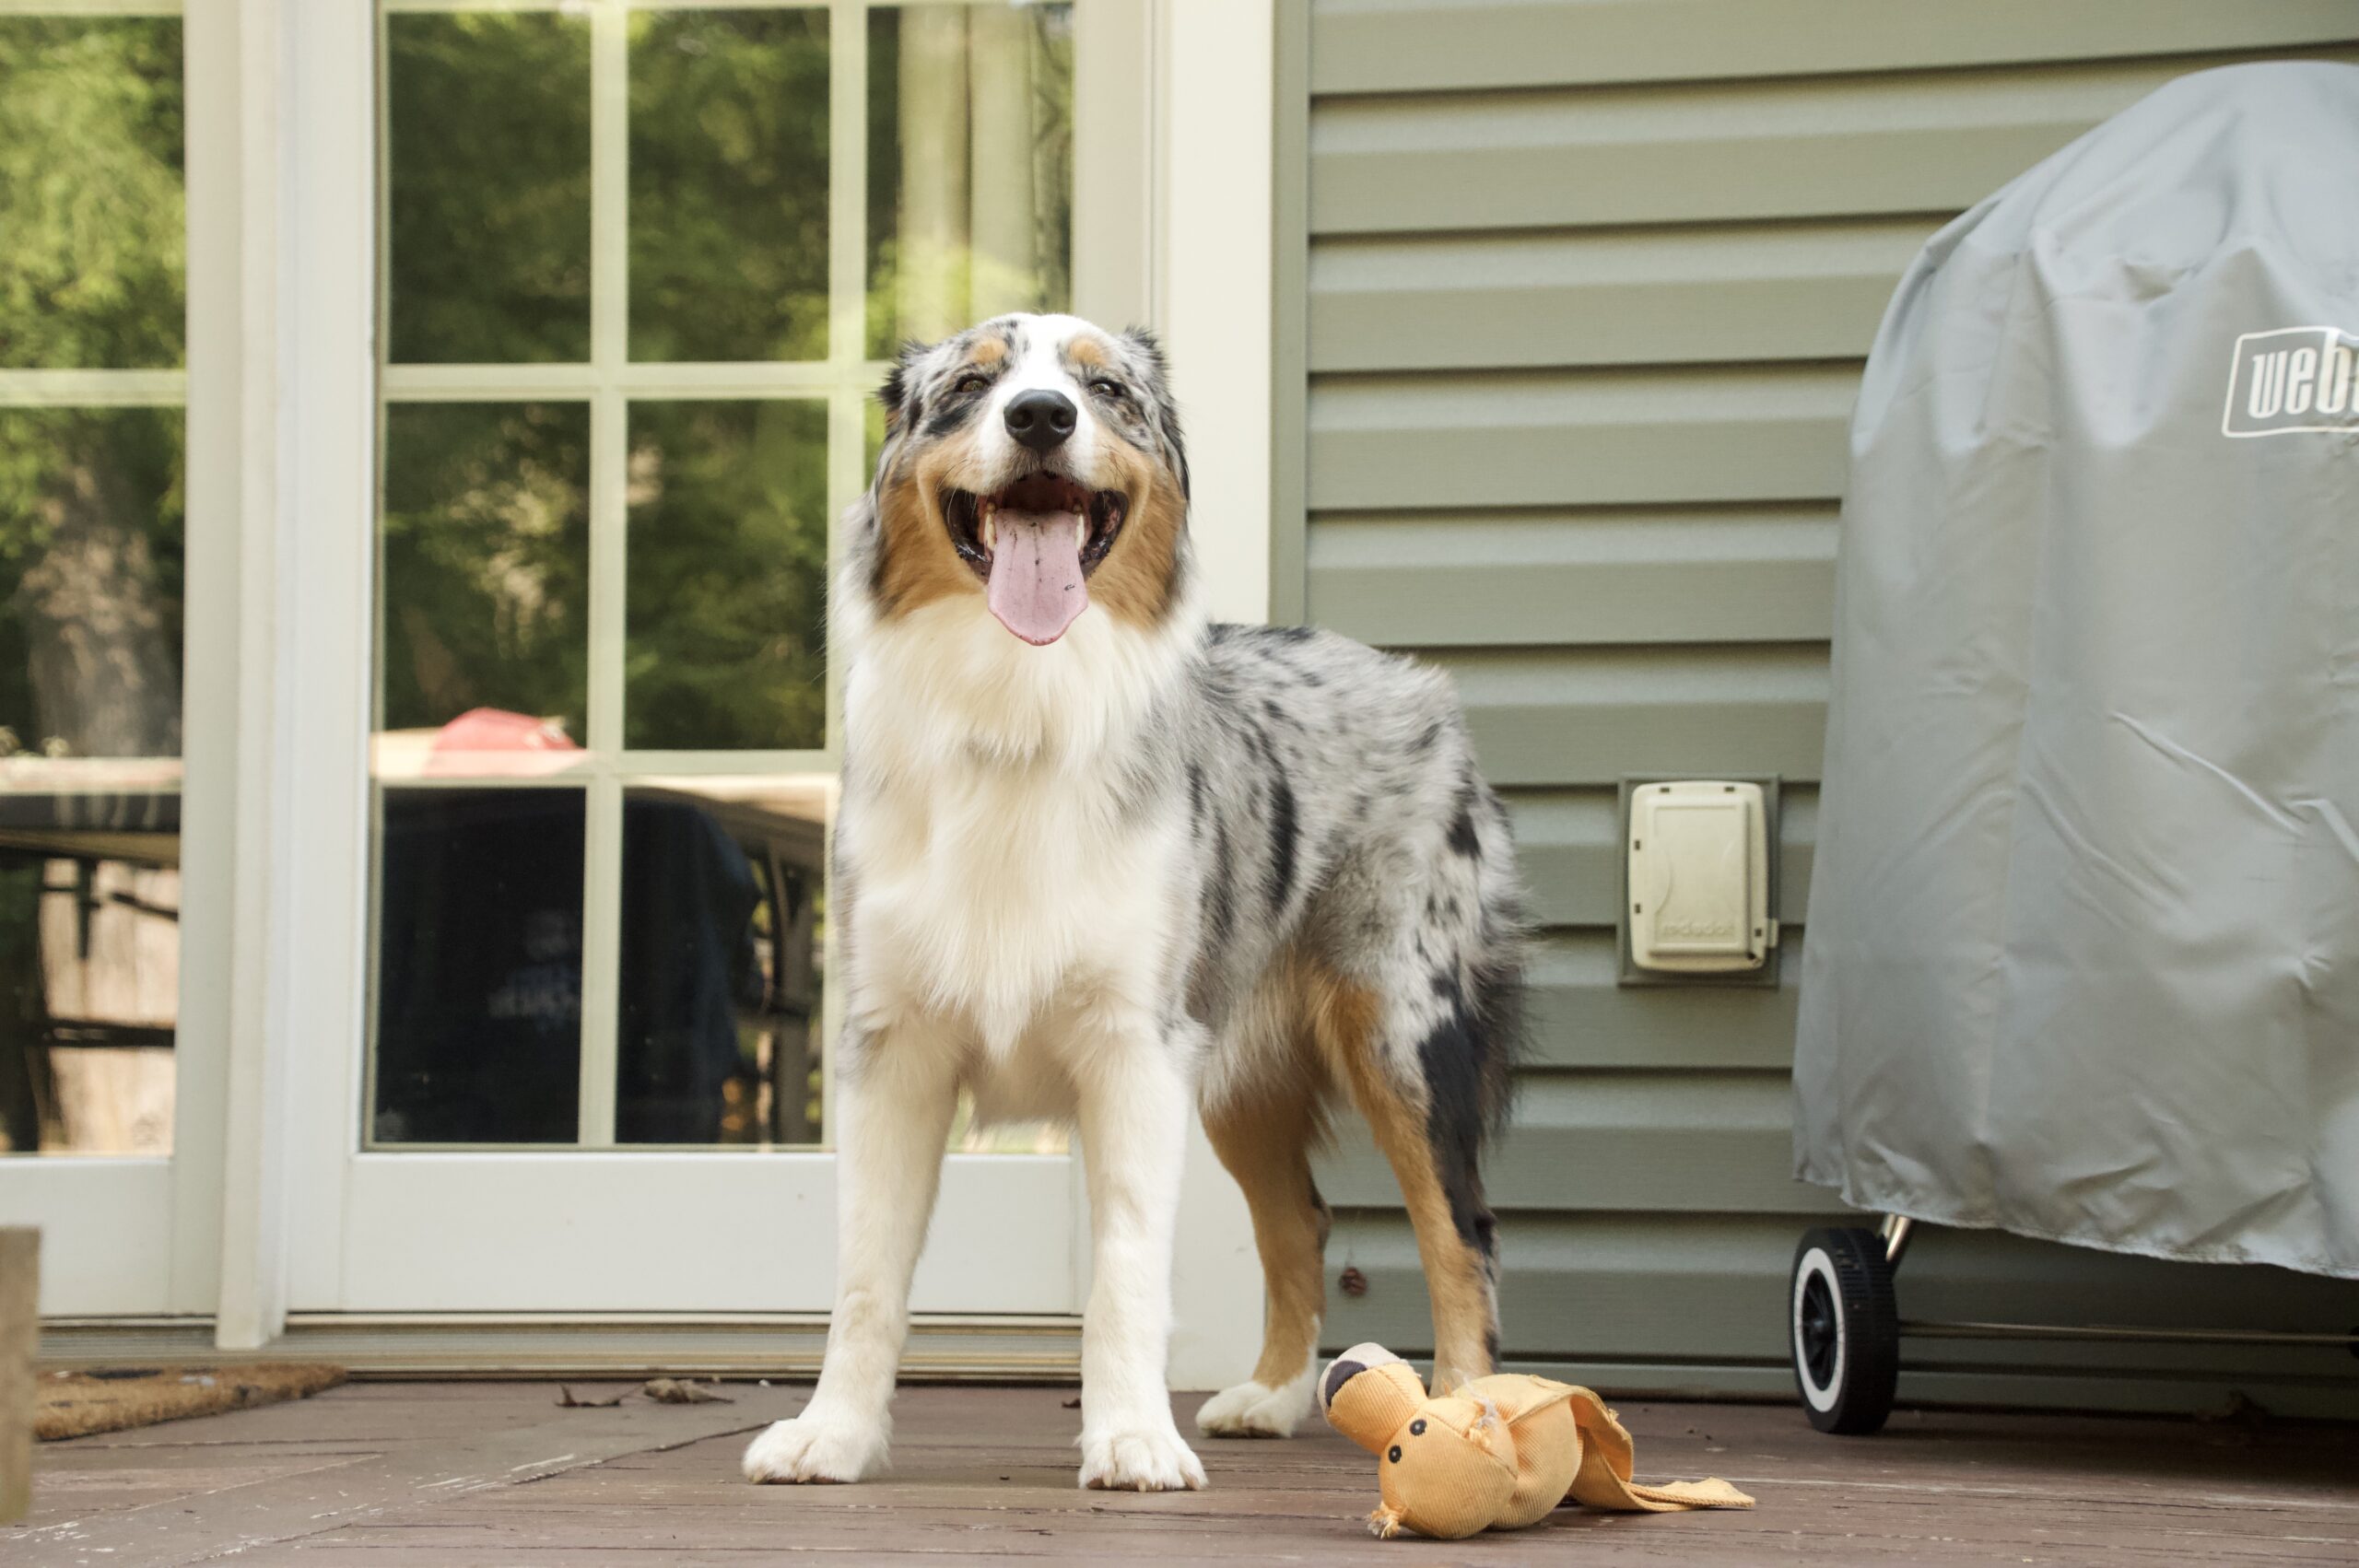 Australian shepherd standing in front of a house, looking straight at the camera. An orange toy sits on the ground next to his paws